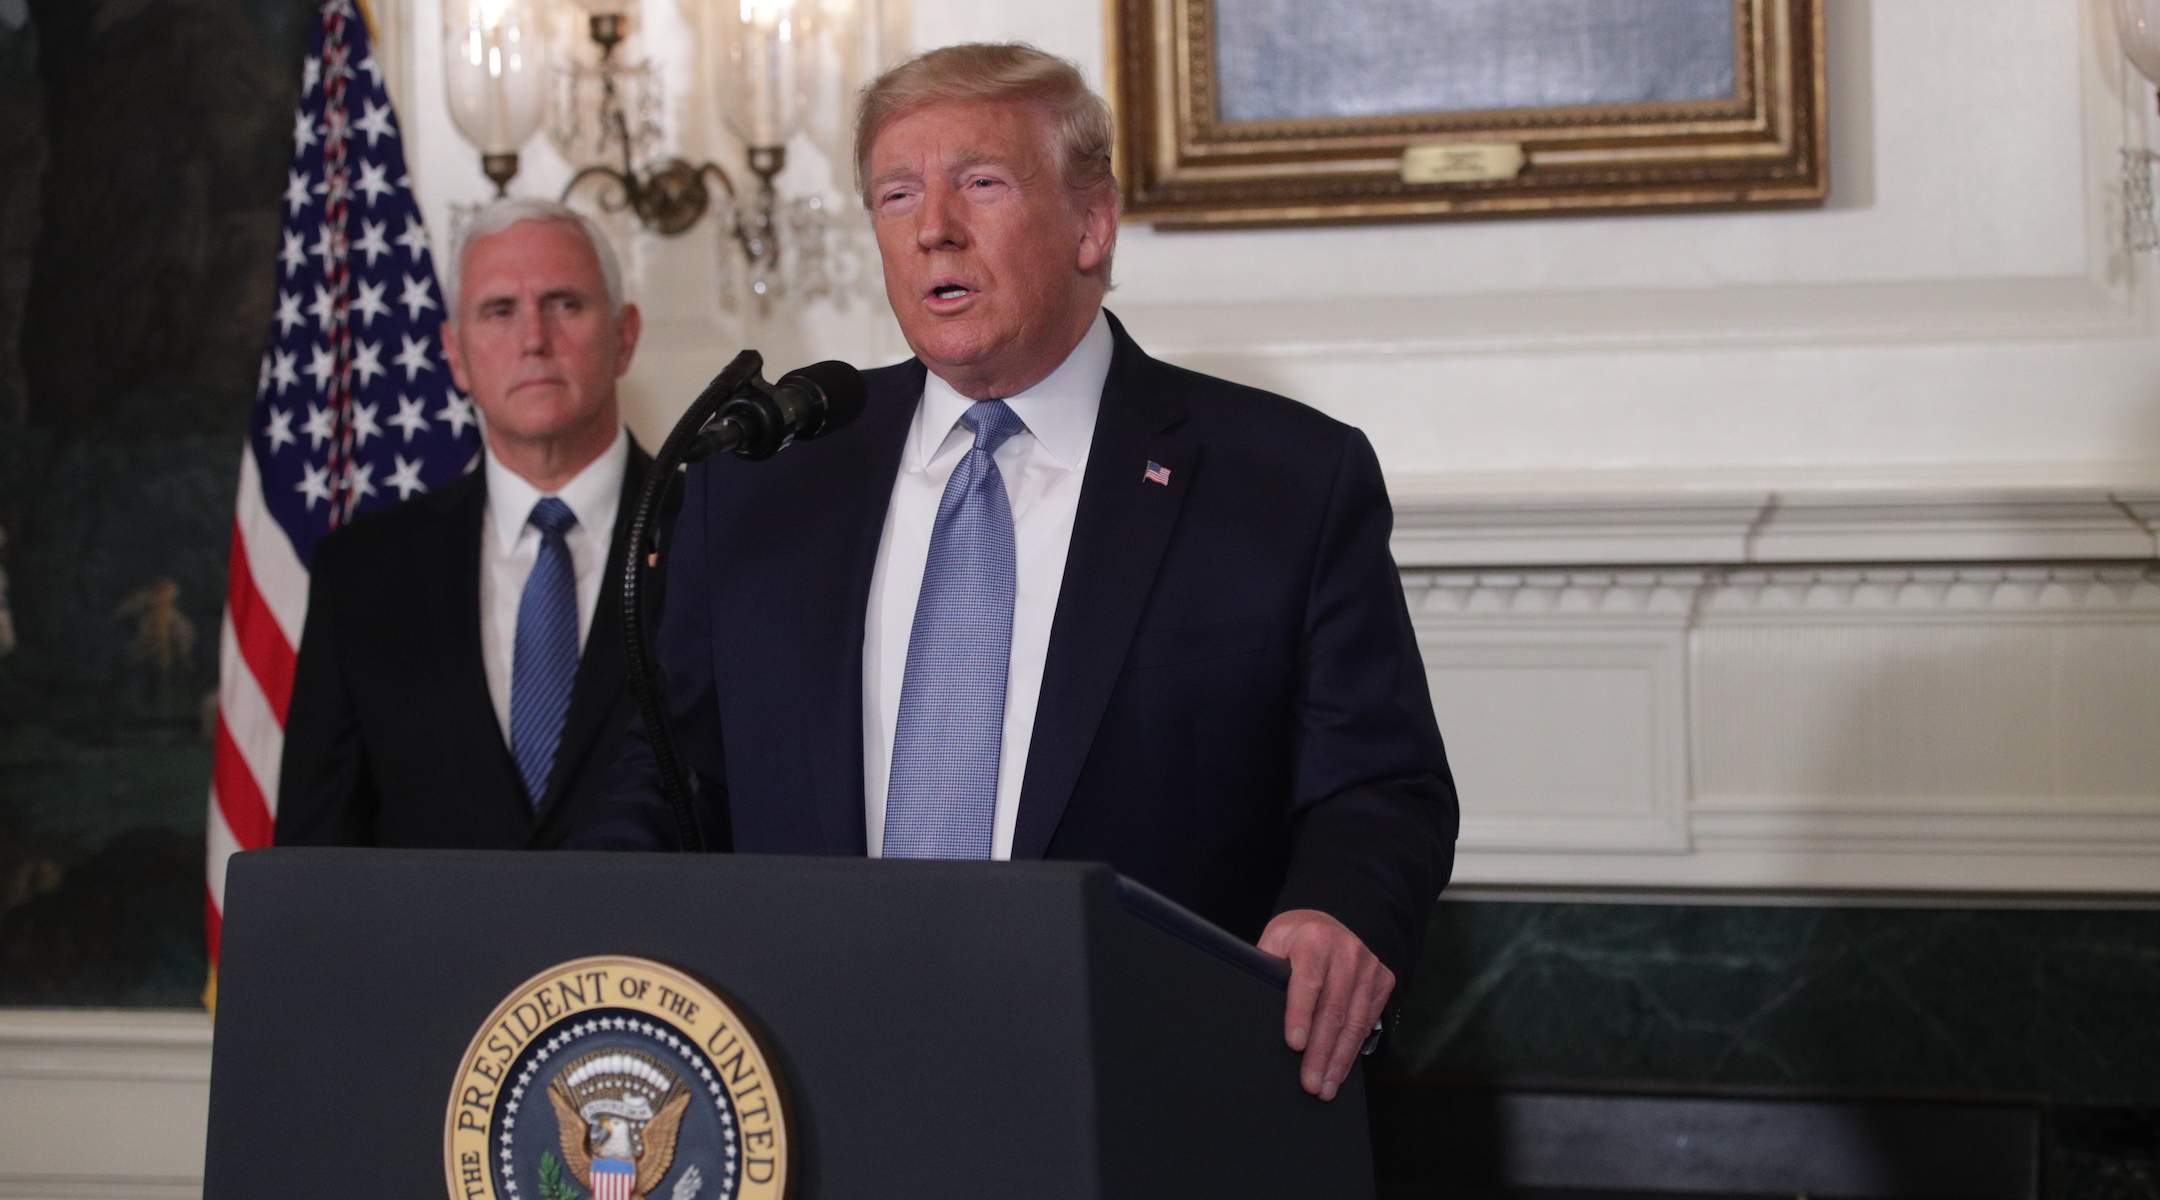 President Donald Trump makes remarks about the mass shootings in El Paso, Tex., and Dayton, Ohio, in the Diplomatic Reception Room of the White House as Vice President Mike Pence, Aug. 5, 2019. (Alex Wong/Getty Images)